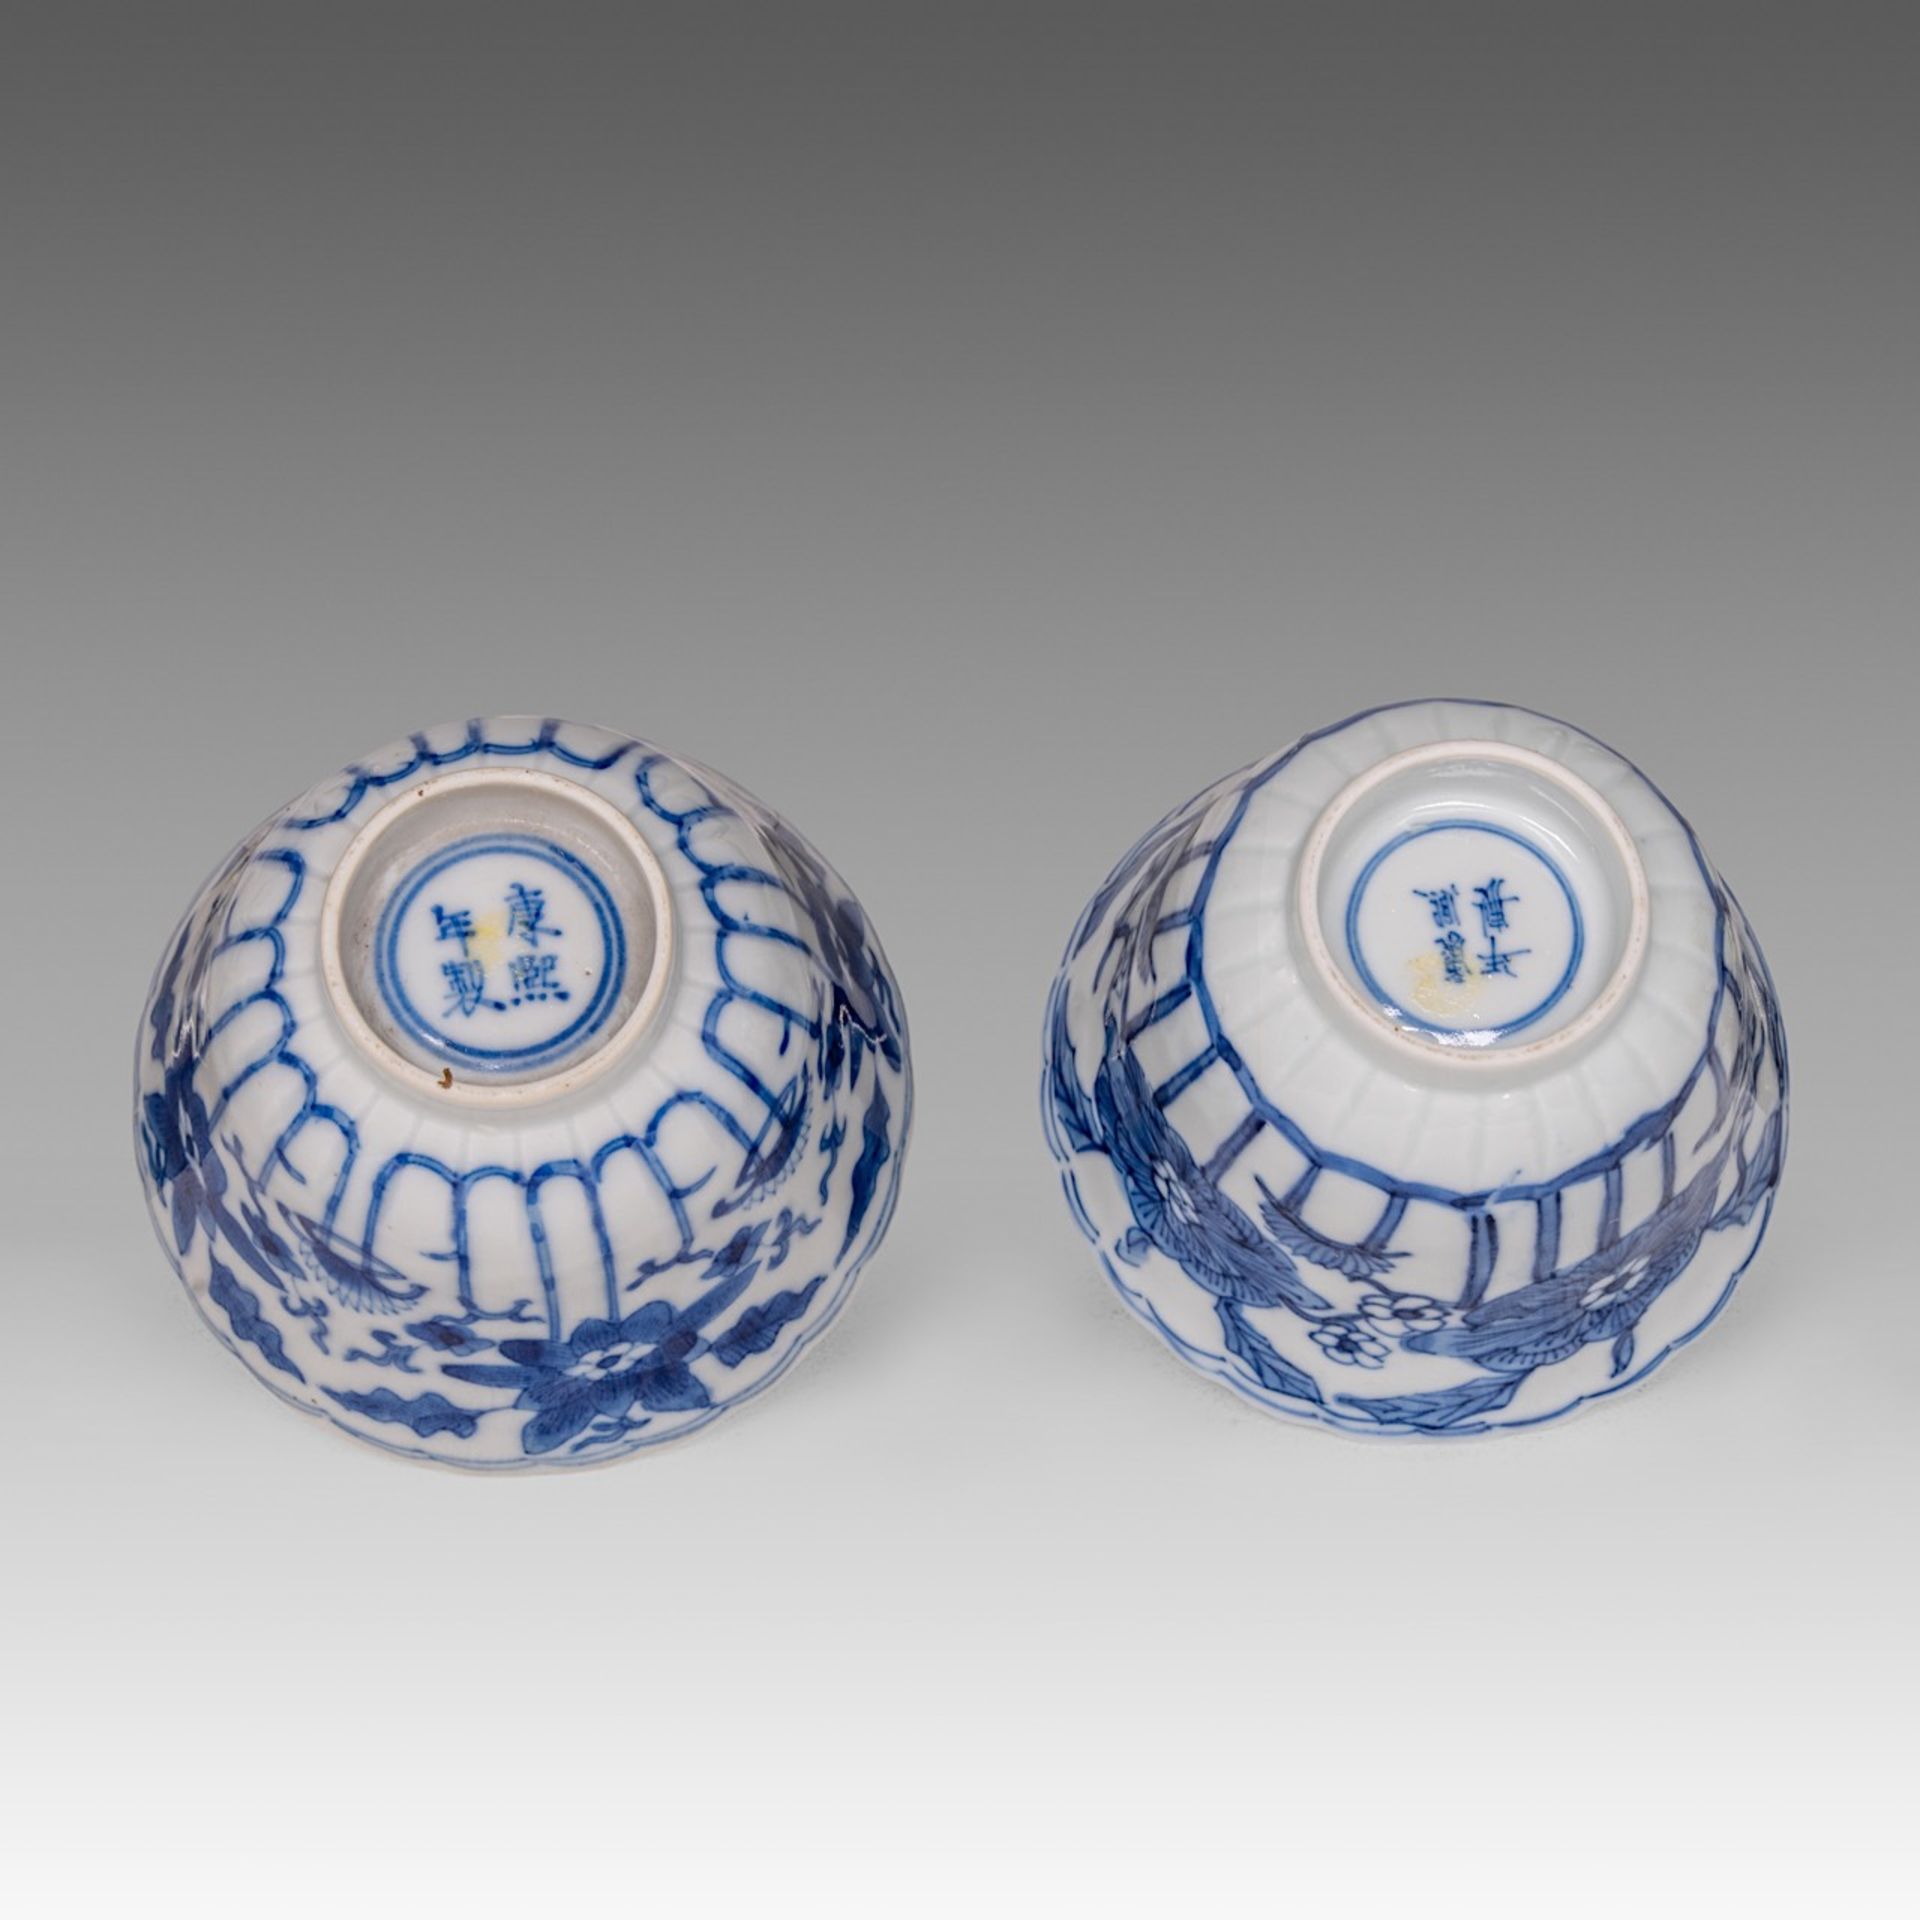 Six matching sets of Chinese blue and white floral decorated tea cups and saucers, Kangxi period, di - Image 11 of 17